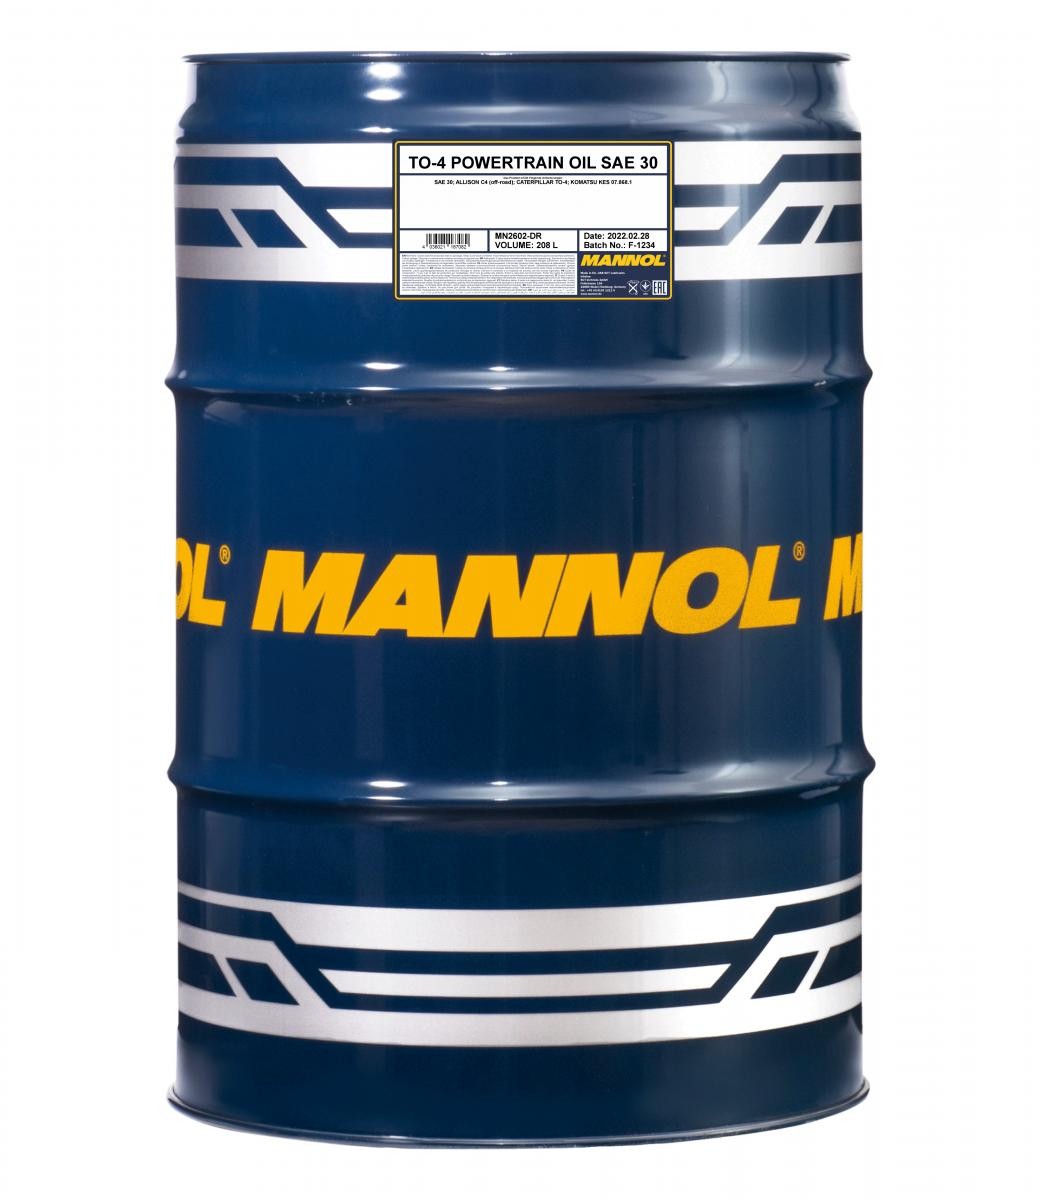 MANNOL TO-4 Powertrain SAE 30, Mineral Oil, Capacity: 208l ALLISON C4(off-road), CATERPILLAR TO-4, KOMATSU KES 07.868.1 Transmission oil MN2602-DR buy